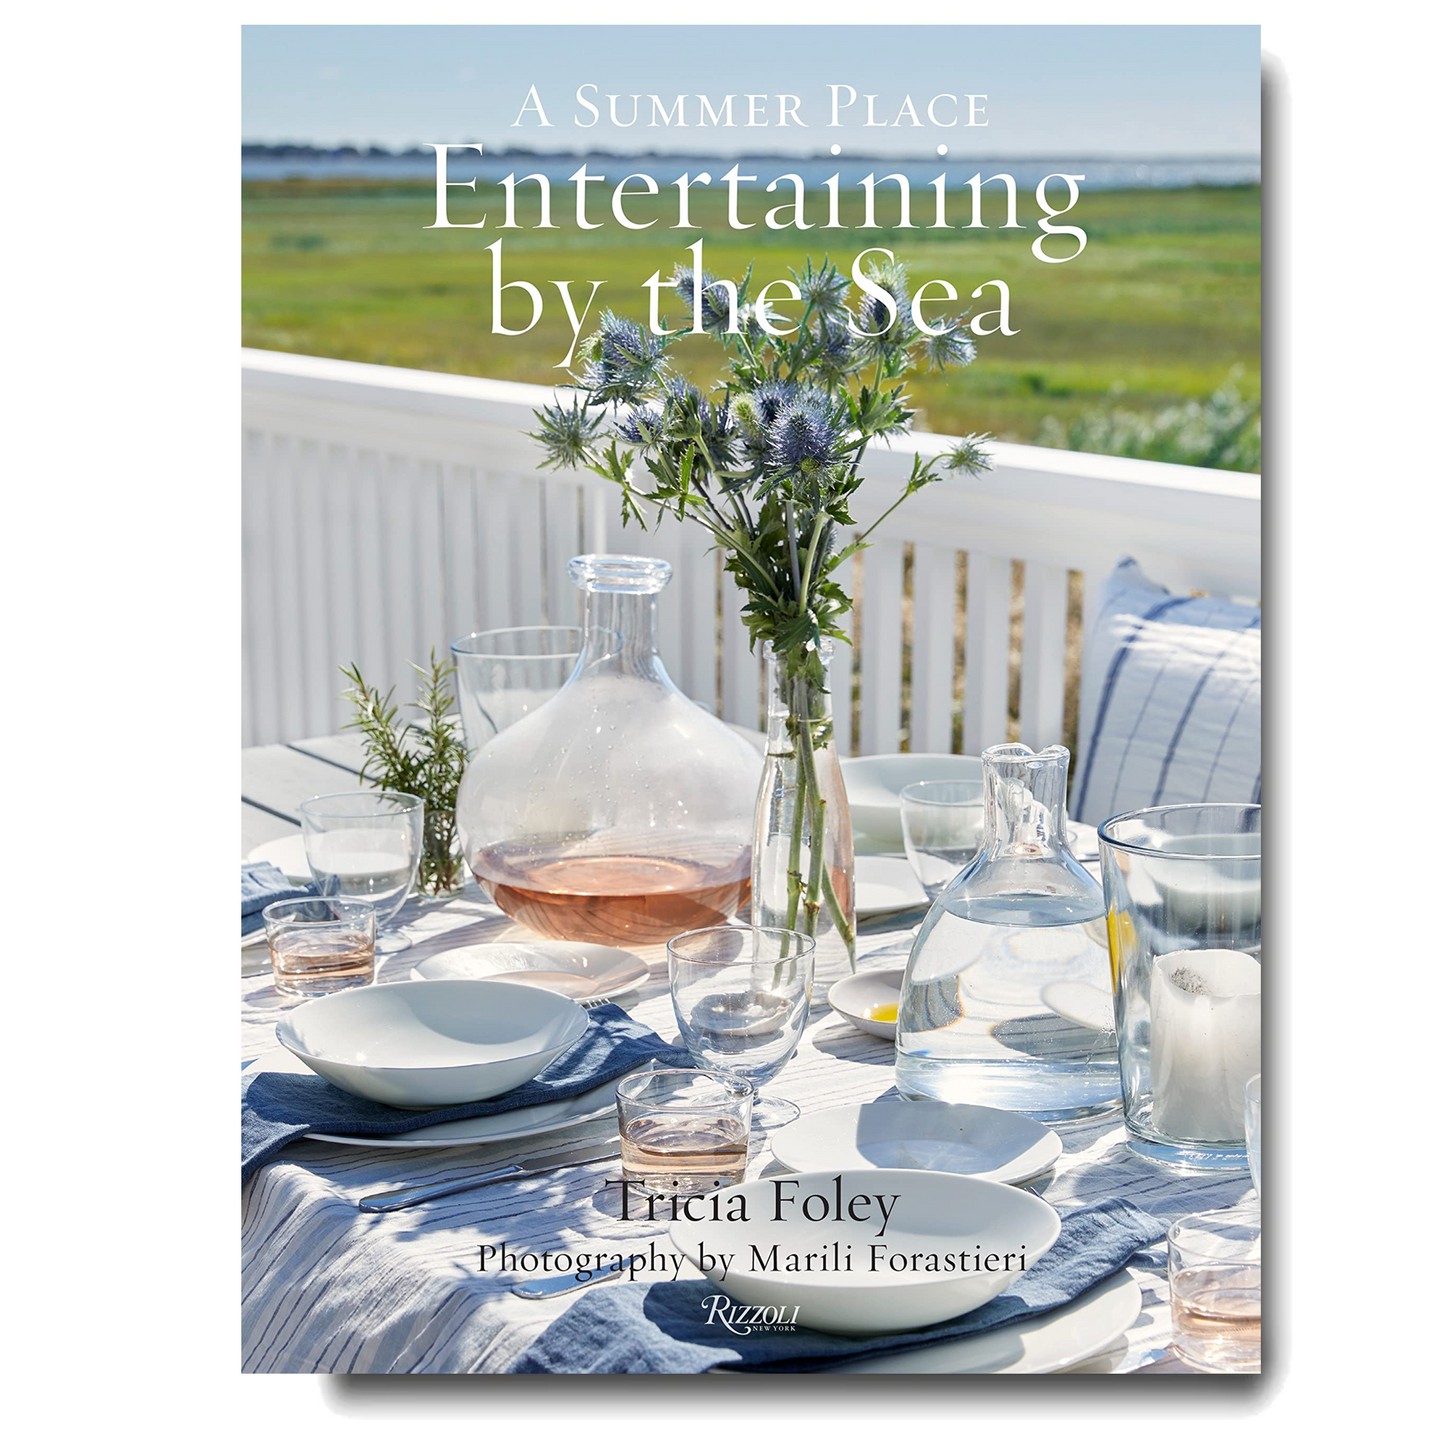 "Entertaining by the Sea: A Summer Place" Book